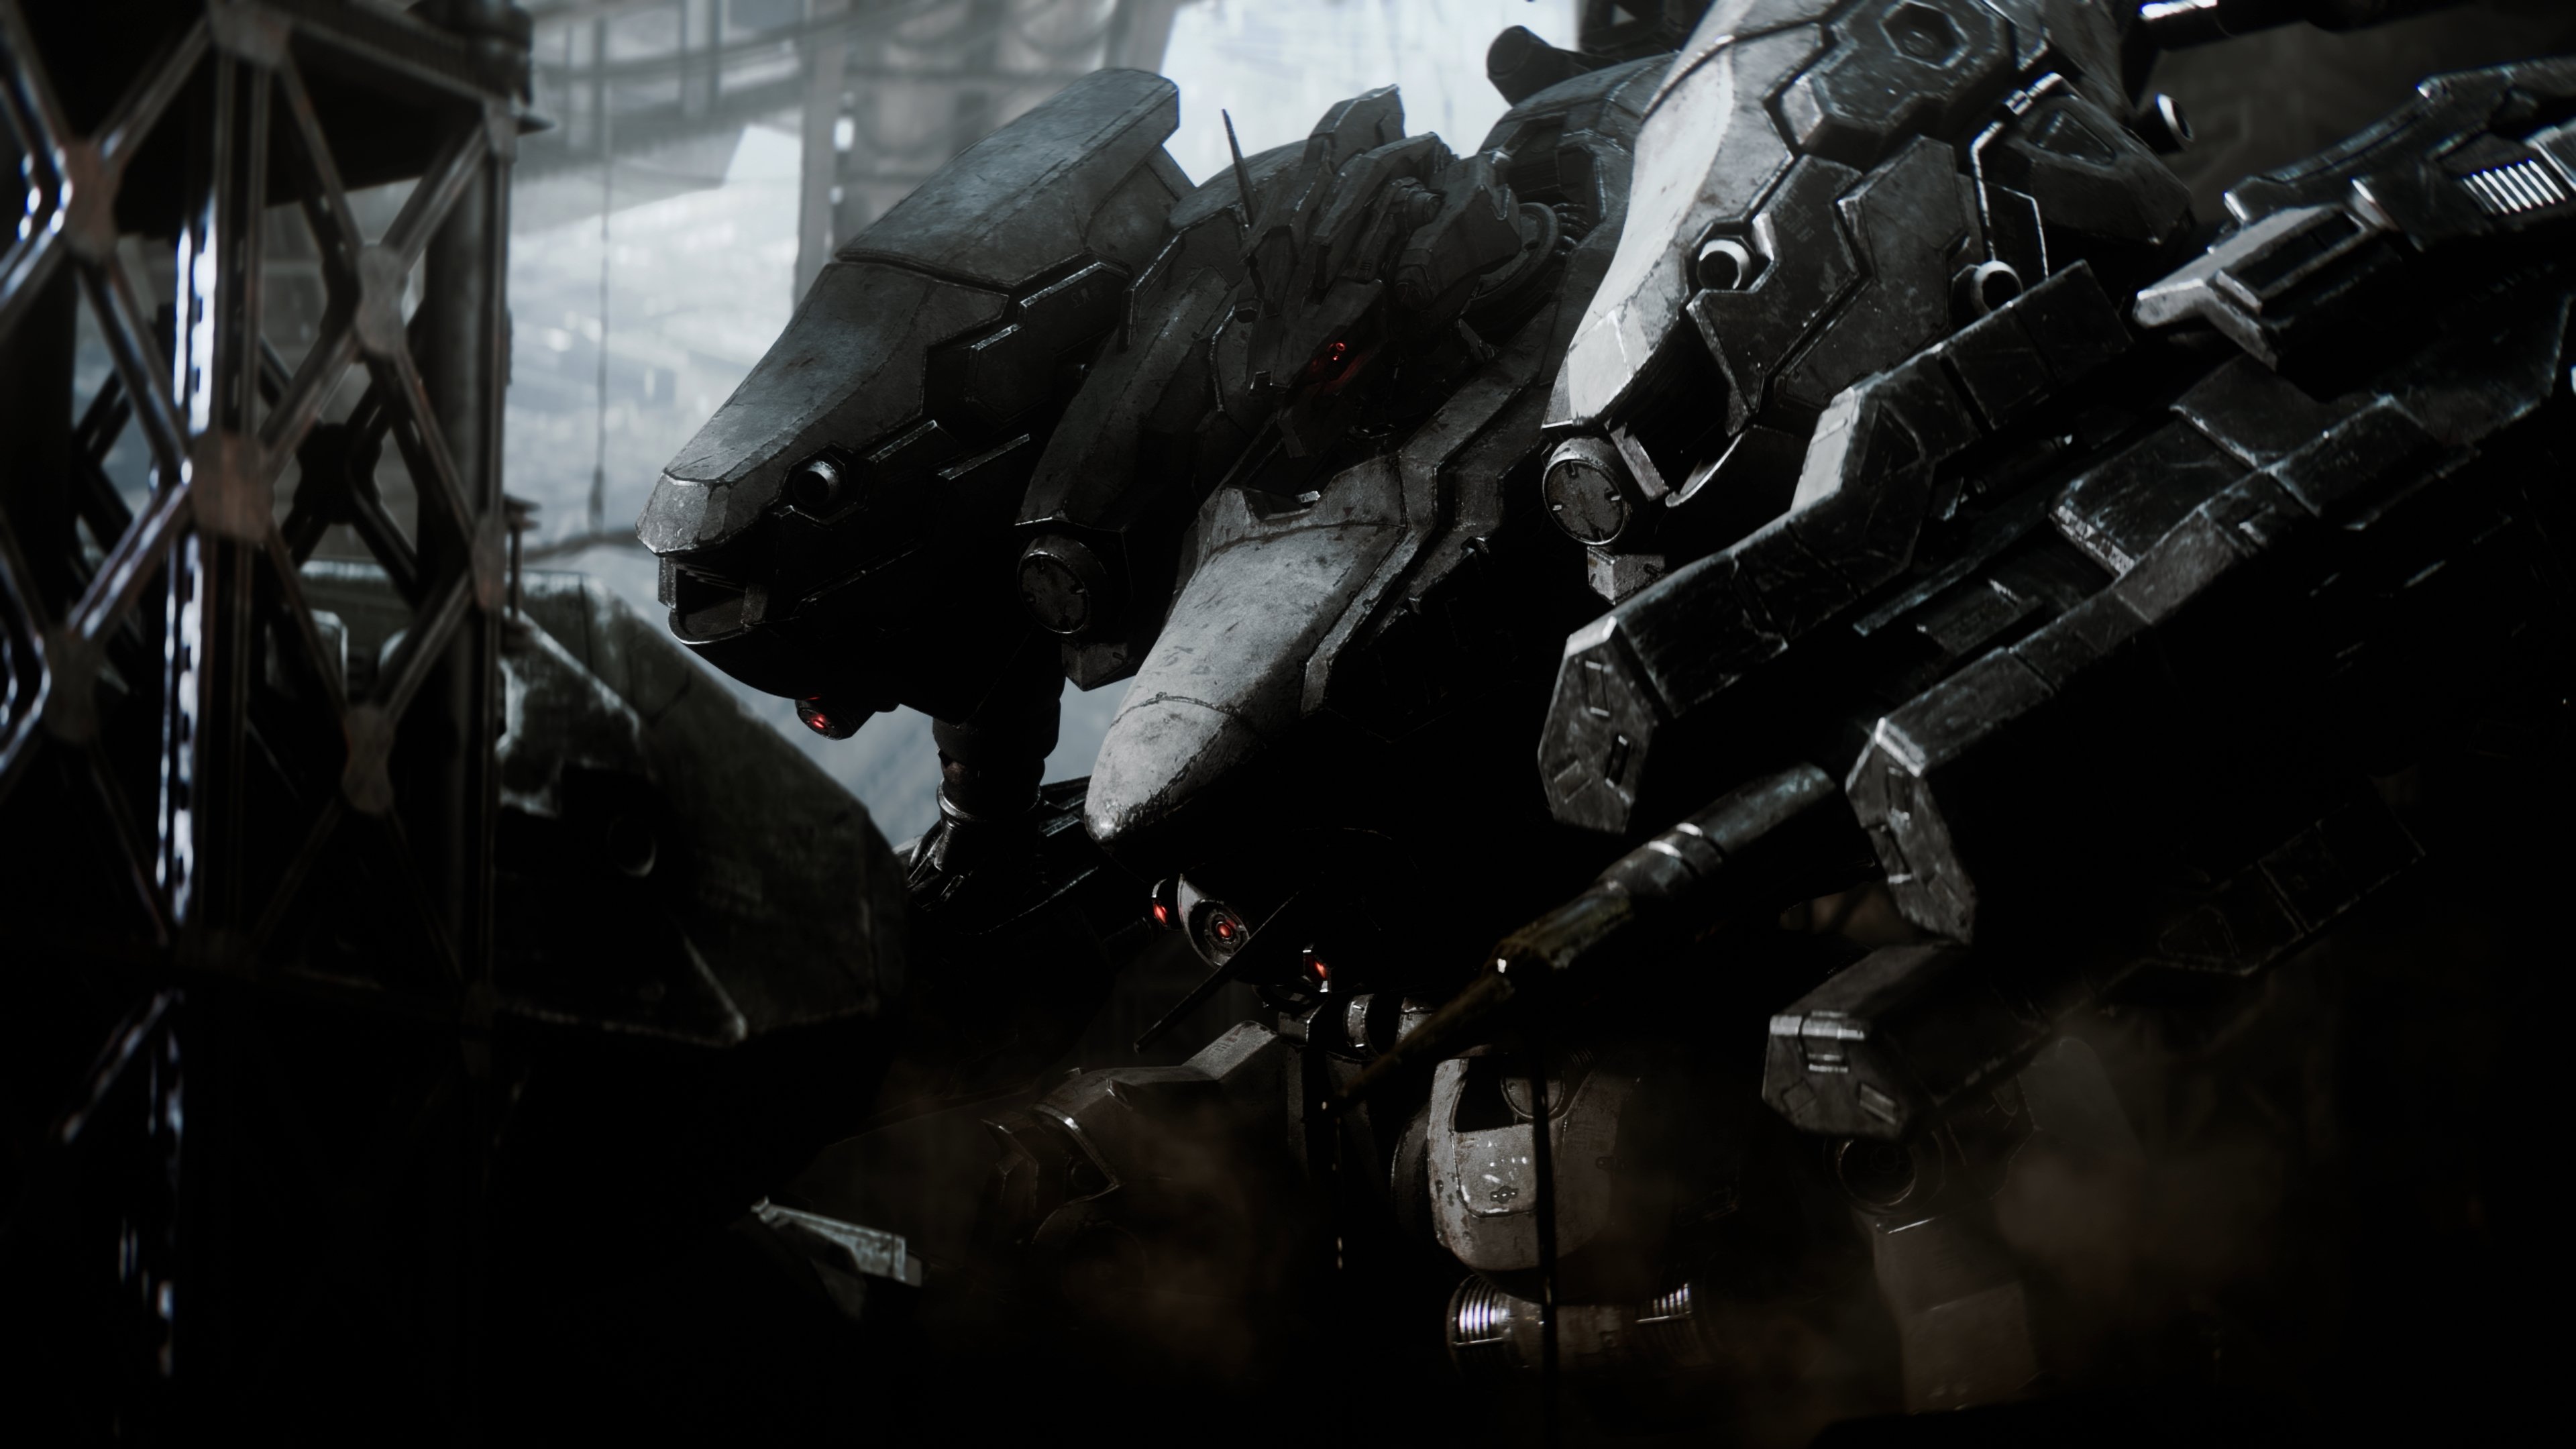 Armored Core Verdict Day (7) - Tech-Gaming